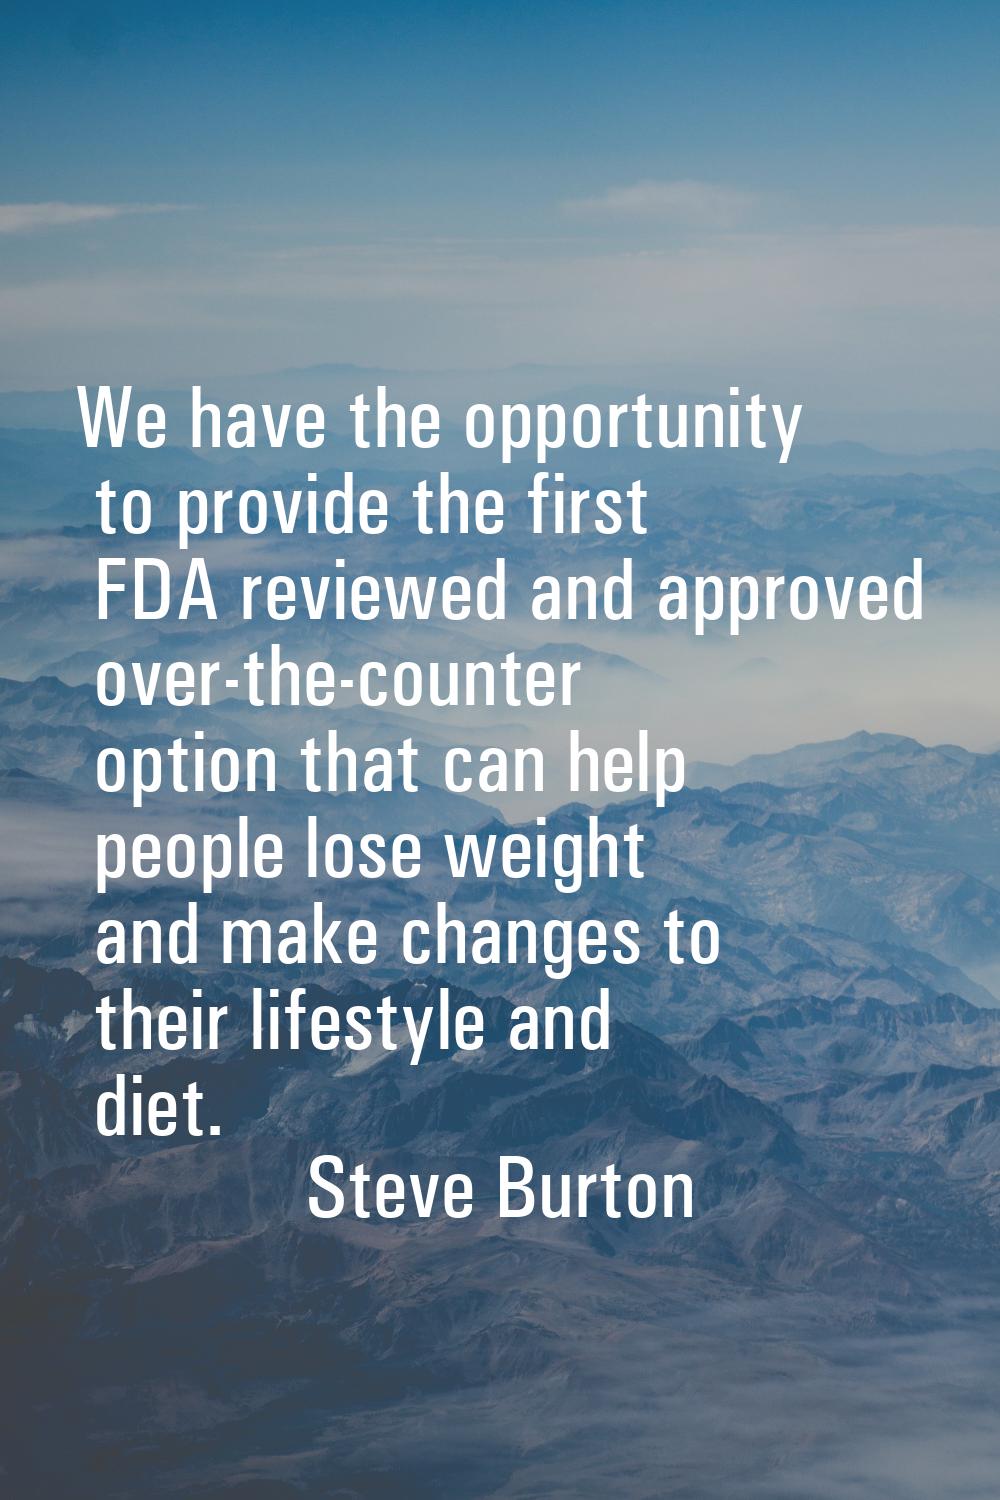 We have the opportunity to provide the first FDA reviewed and approved over-the-counter option that